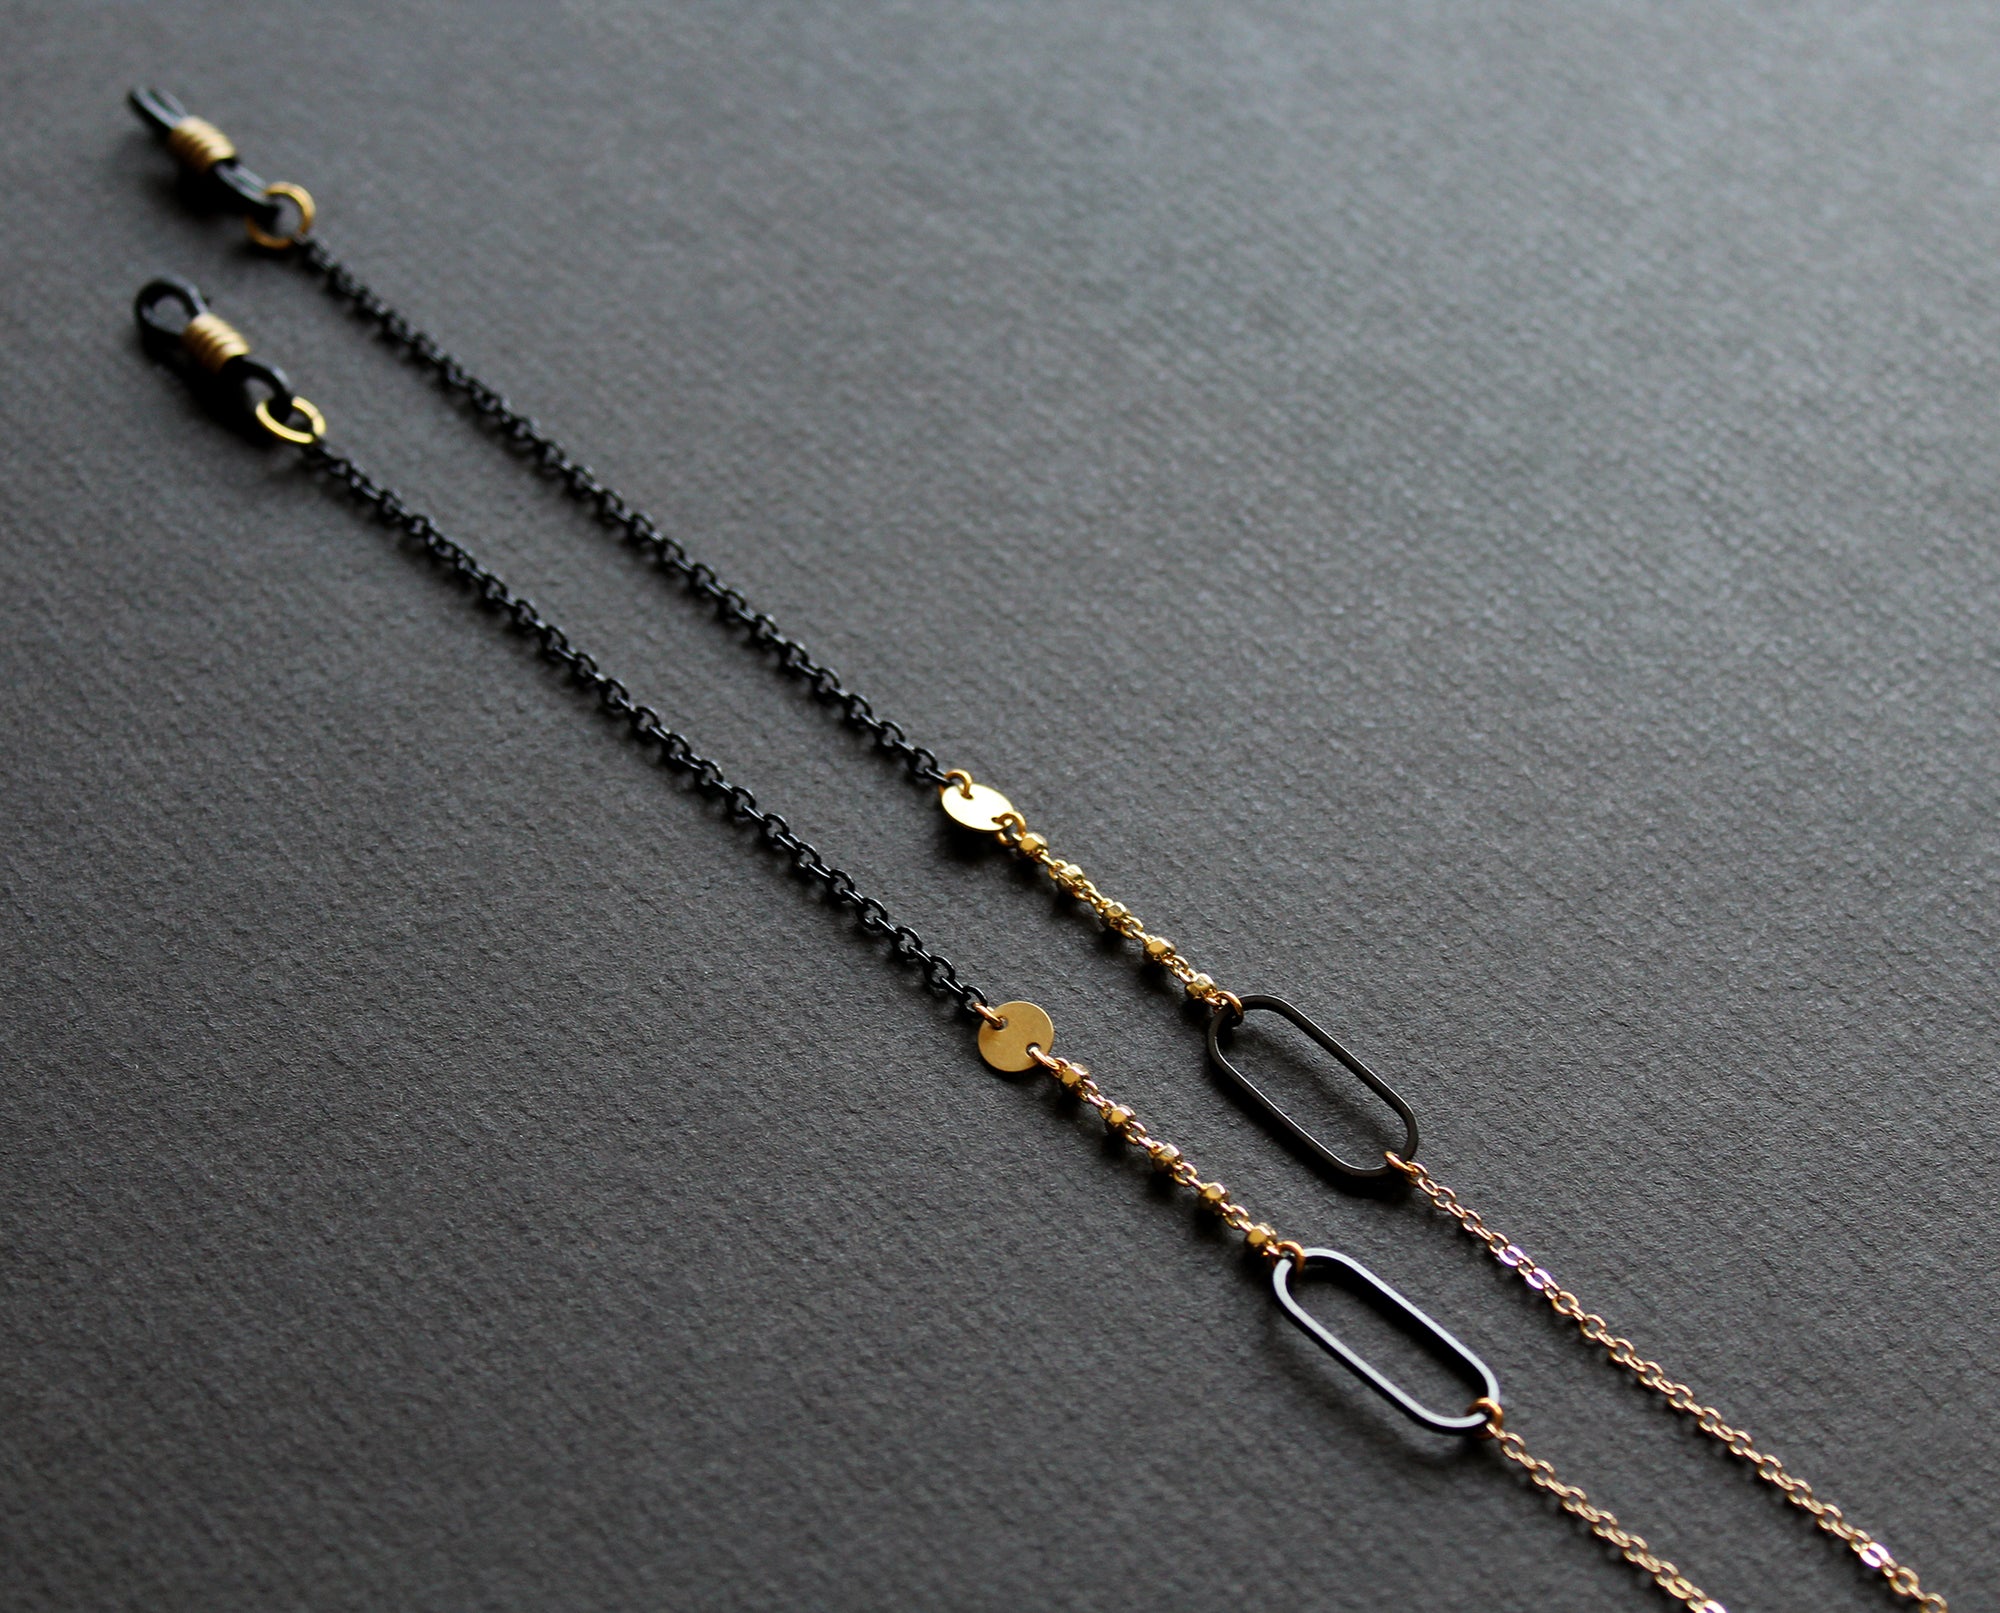 Glasses Chains products from Nea - Artisan jewelry handmade in Canada